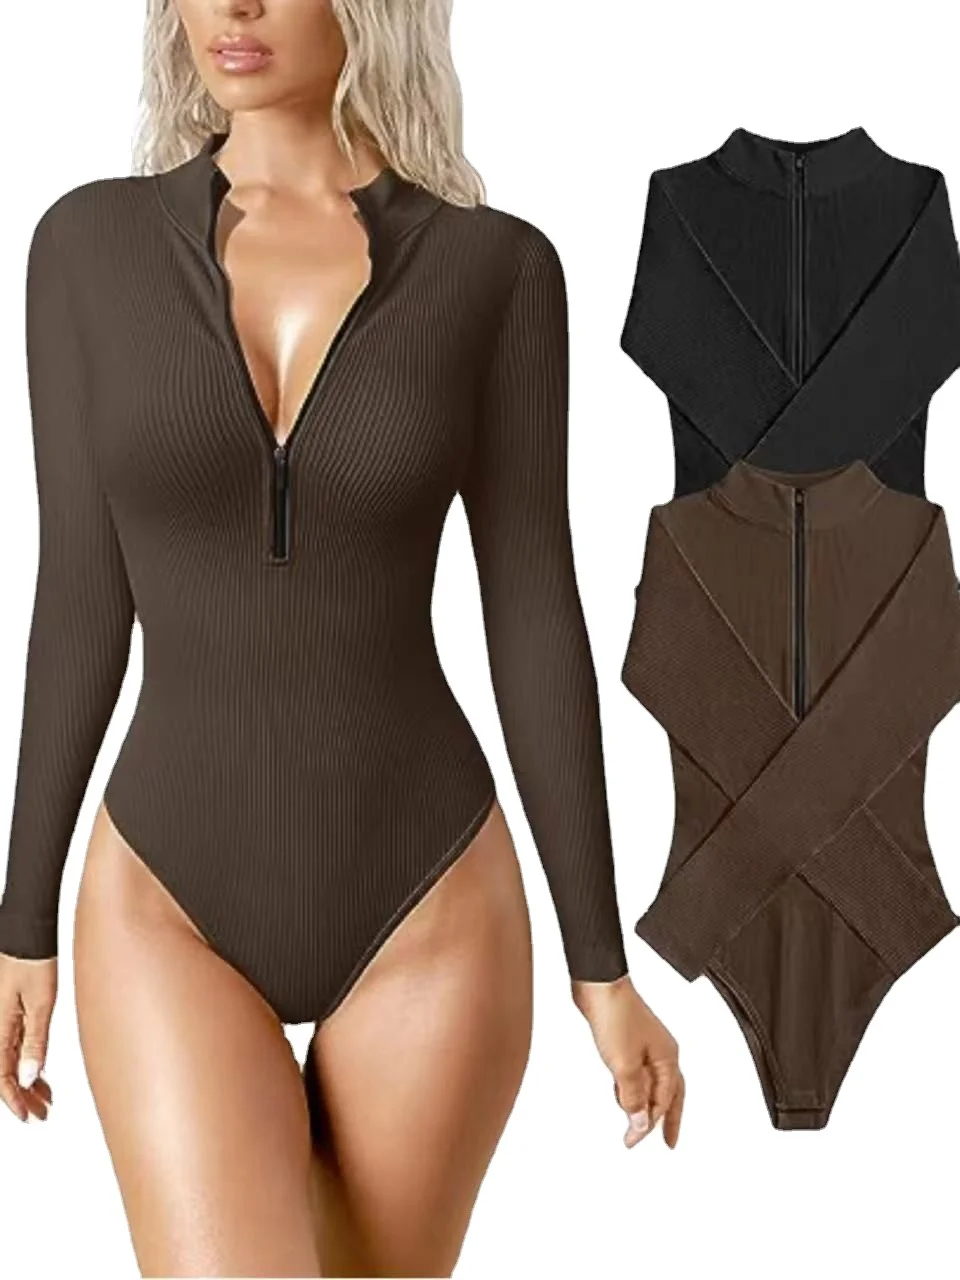 Women's Sport Jumpsuit Ribbed Tight Body Suits Sexy Outfit Fitness Workout Yoga Long Sleeve Bodysuit Zipper One Piece Bodysuit